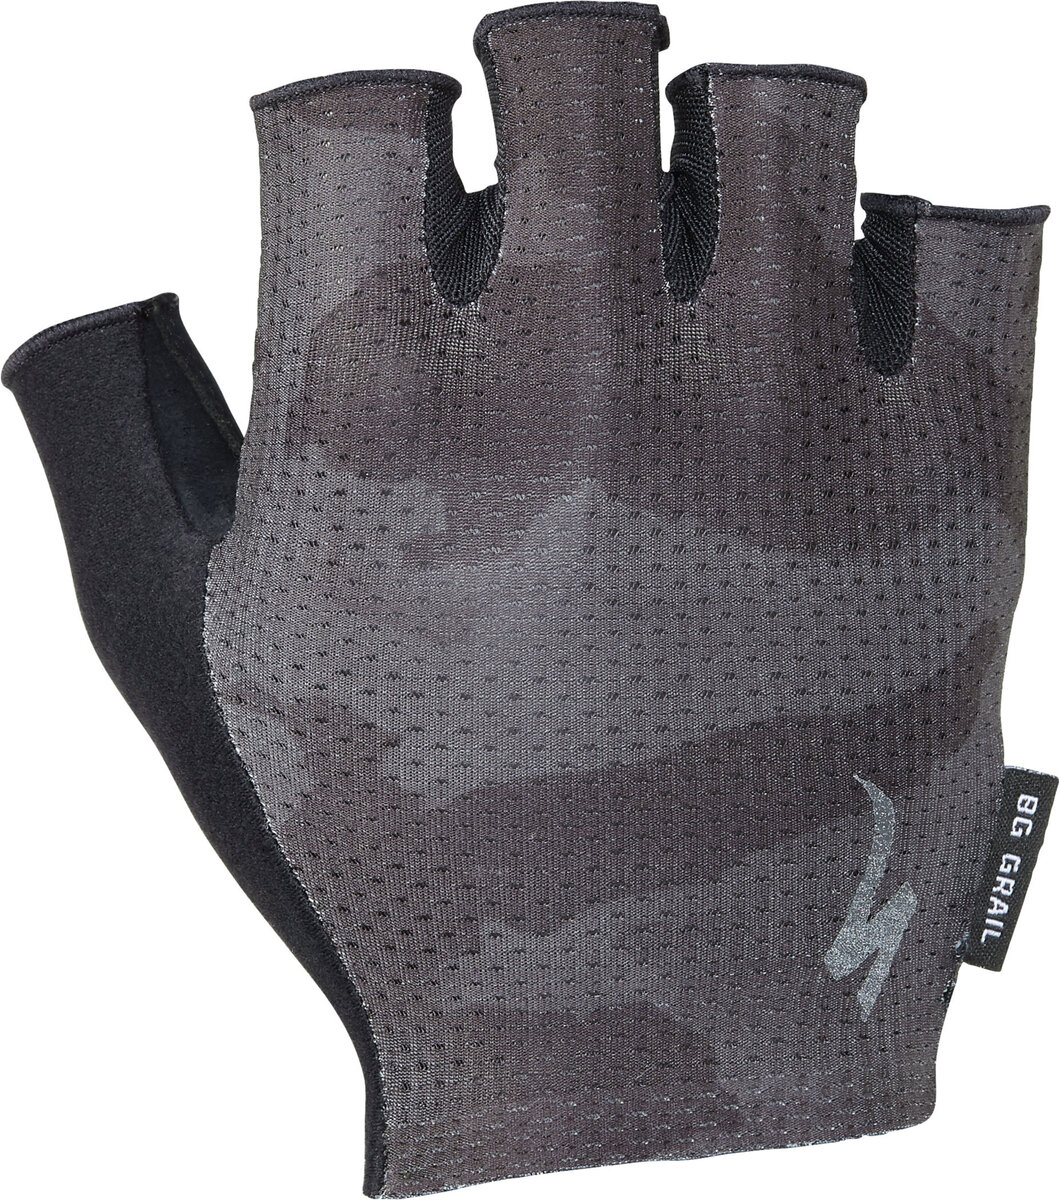 Specialized BG Grail Short Finger Glove - Ridley's Cycle | Calgary ...